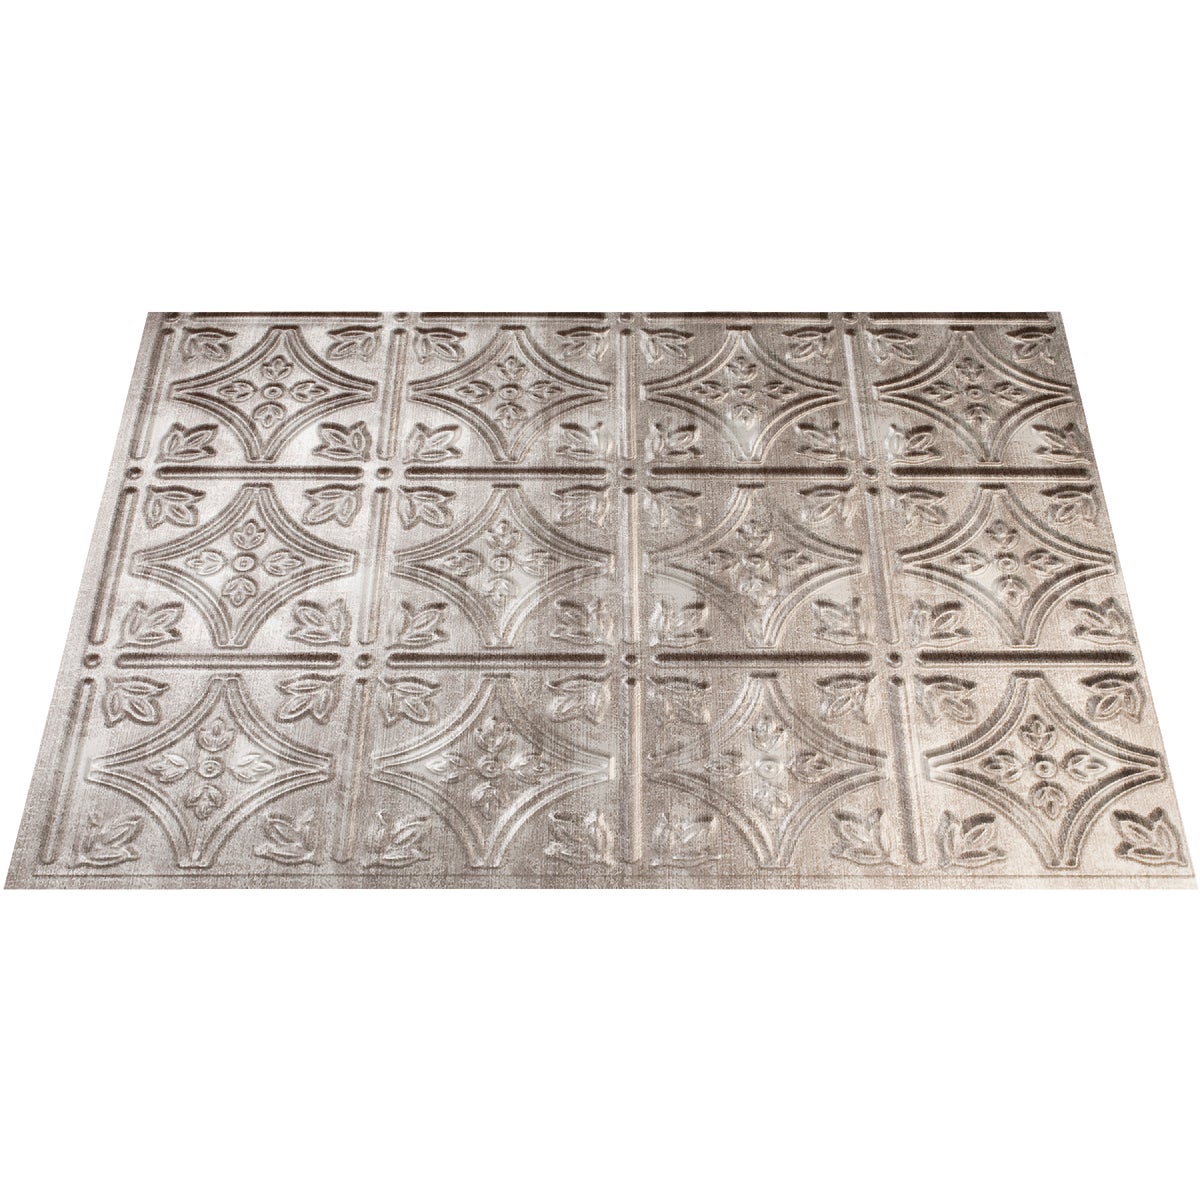 Fasade D60-21 Fasade 18 In. x 24 In. Thermoplastic Backsplash Panel, Cross Hatch Silver Traditional 1 D60-21 Pack of 5